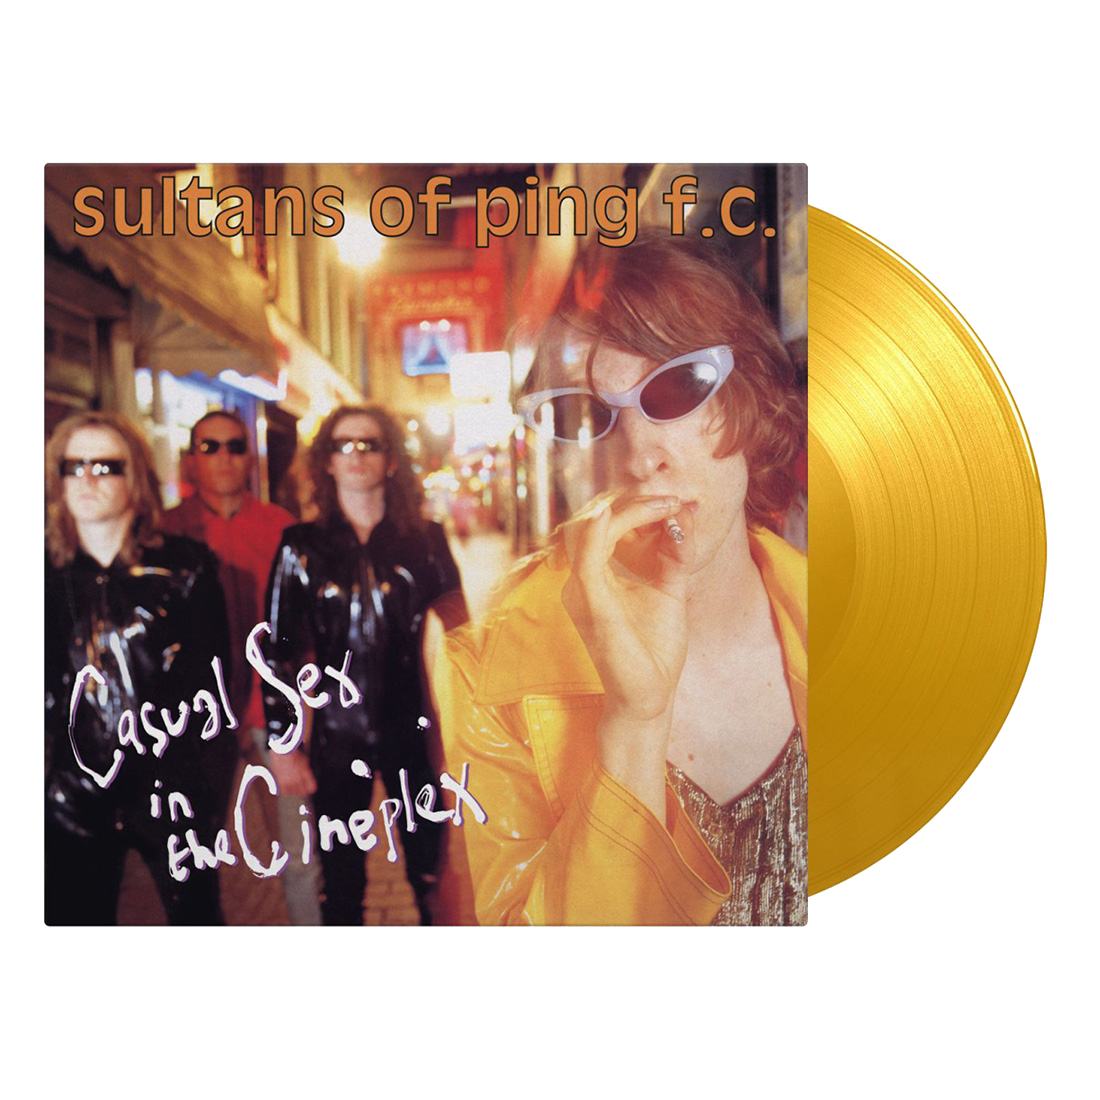 Sultans Of Ping F.C. - Casual Sex In The Cineplex: Yellow Vinyl LP